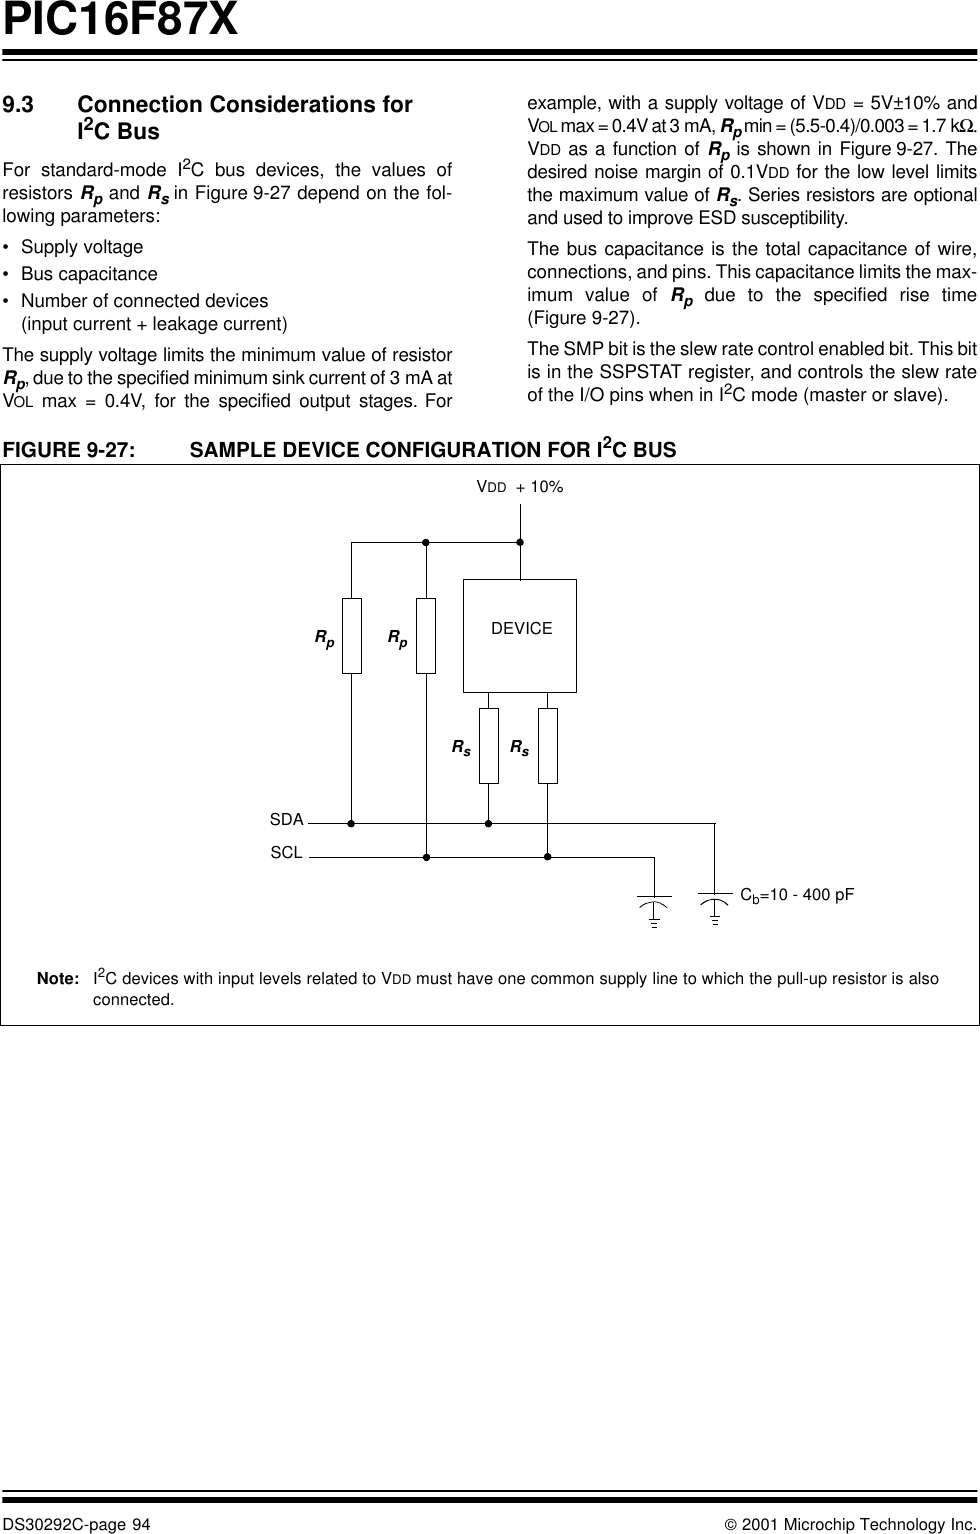 PIC16F87XDS30292C-page 94  2001 Microchip Technology Inc.9.3 Connection Considerations for I2C BusFor standard-mode I2C bus devices, the values ofresistors Rp and Rs in Figure 9-27 depend on the fol-lowing parameters:•Supply voltage•Bus capacitance•Number of connected devices (input current + leakage current)The supply voltage limits the minimum value of resistorRp, due to the specified minimum sink current of 3 mA atVOL max = 0.4V, for the specified output stages. Forexample, with a supply voltage of VDD = 5V±10% andVOL max = 0.4V at 3 mA, Rp min = (5.5-0.4)/0.003 = 1.7 kΩ.VDD as a function of Rp is shown in Figure 9-27. Thedesired noise margin of 0.1VDD for the low level limitsthe maximum value of Rs. Series resistors are optionaland used to improve ESD susceptibility.The bus capacitance is the total capacitance of wire,connections, and pins. This capacitance limits the max-imum value of Rp due to the specified rise time(Figure 9-27).The SMP bit is the slew rate control enabled bit. This bitis in the SSPSTAT register, and controls the slew rateof the I/O pins when in I2C mode (master or slave).FIGURE 9-27: SAMPLE DEVICE CONFIGURATION FOR I2C BUS       RpRpVDD  + 10%SDASCLDEVICECb=10 - 400 pFRsRsNote: I2C devices with input levels related to VDD must have one common supply line to which the pull-up resistor is alsoconnected.